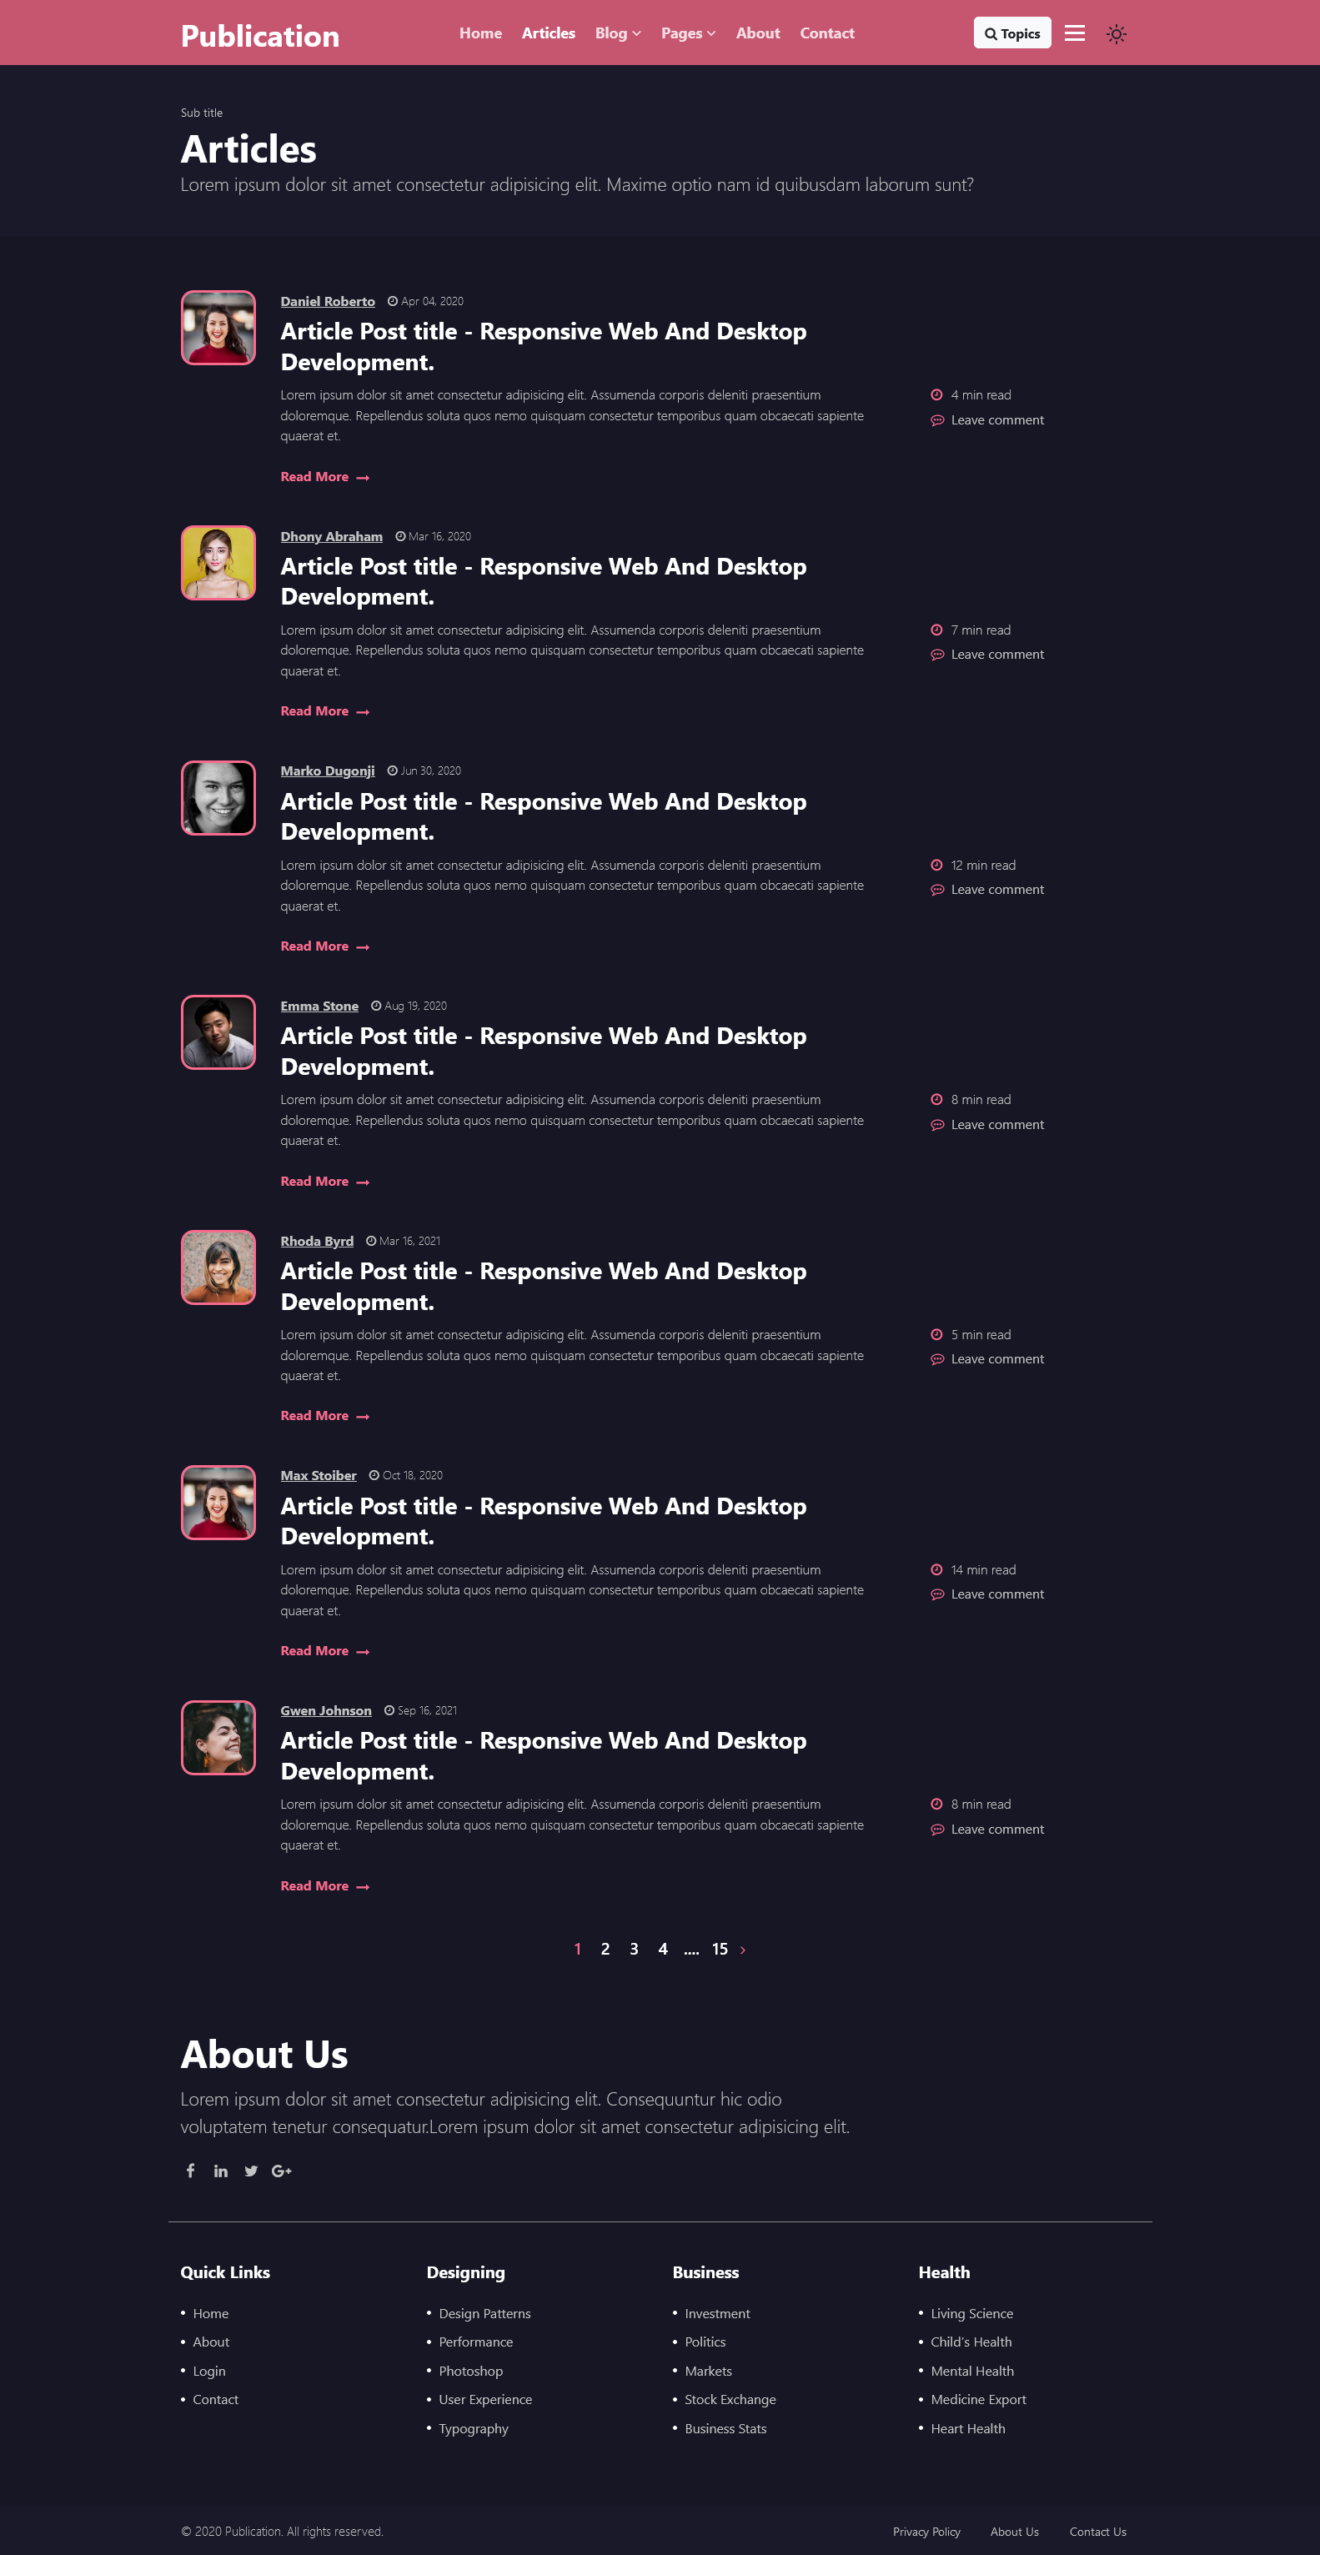 articles page in a blogging website templates